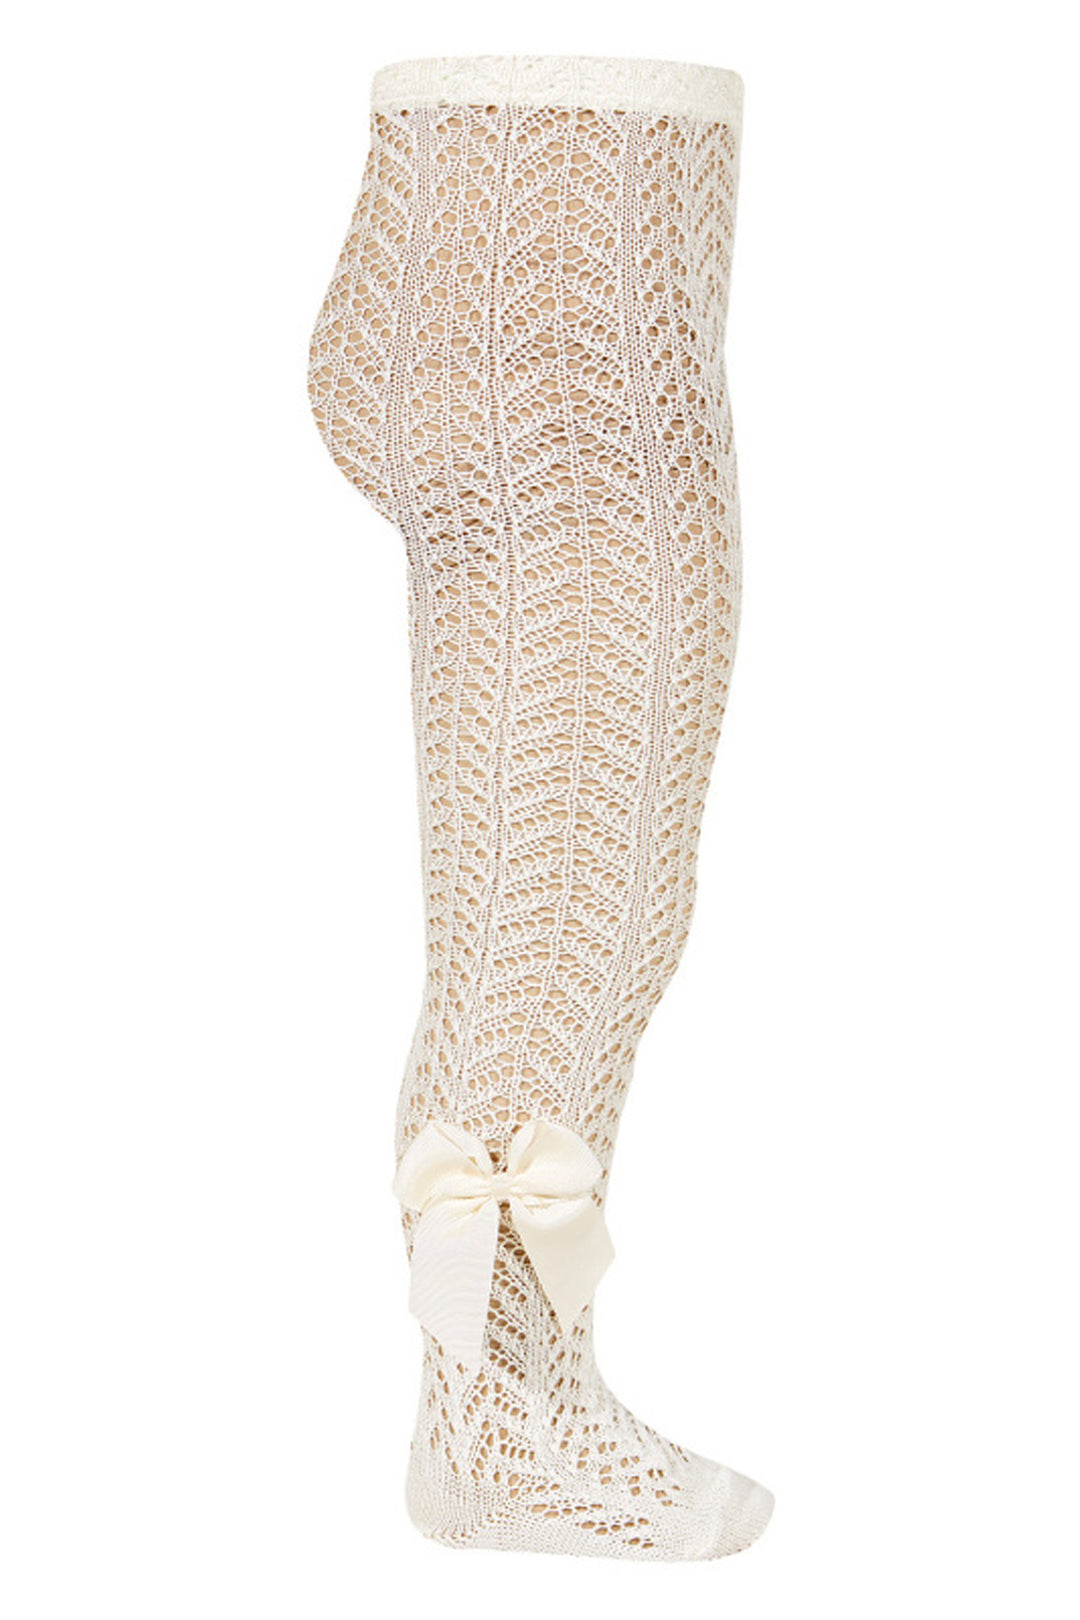 Condor Cream Lace Openwork Bow Tights | Millie and John